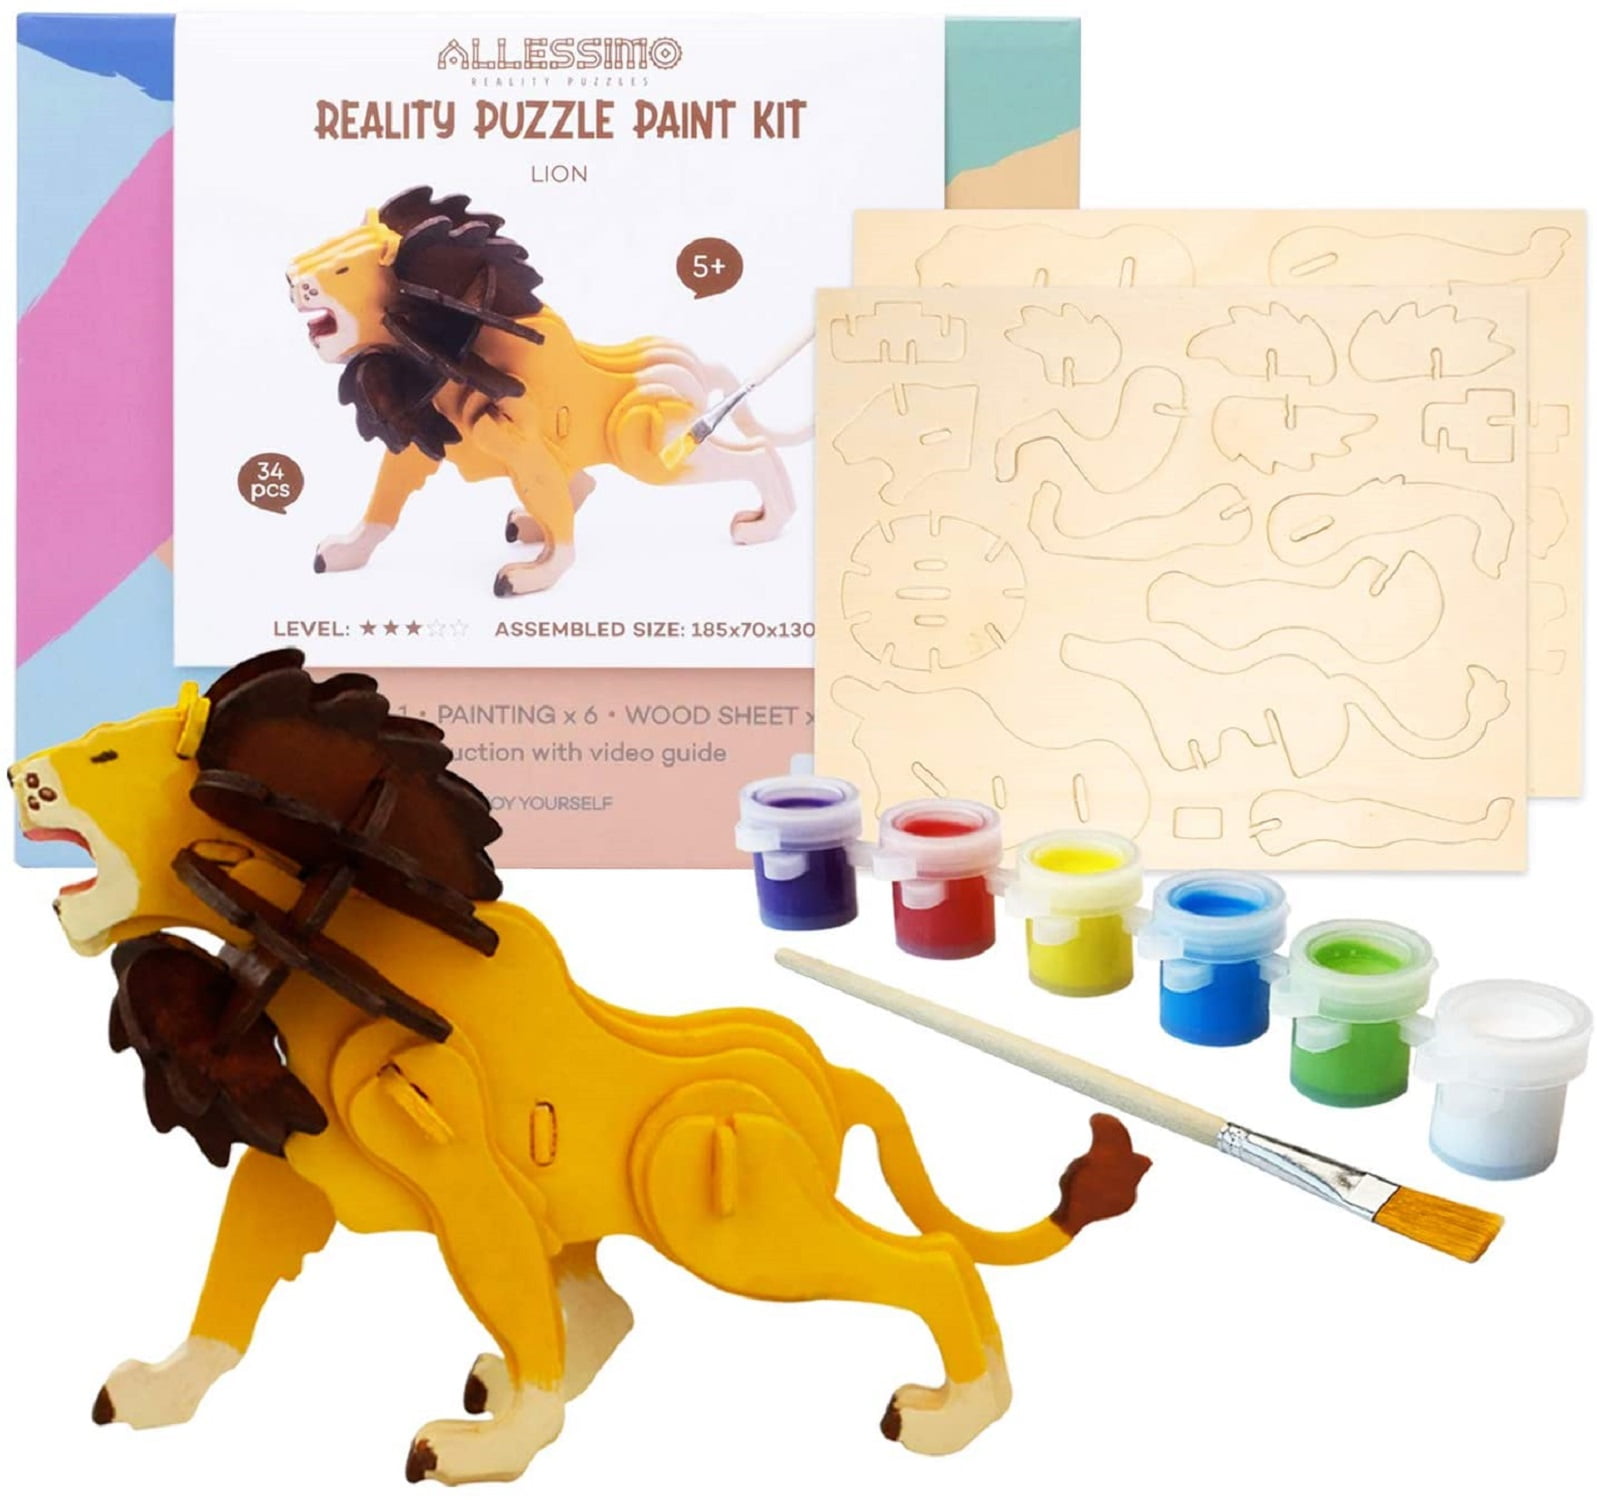 Model Paint Kit with Brush Toys for Children STEVOY DIY 3D Paint Wooden Puzzles Kit for Kids Pack of 6 Animals Educational Crafts Building STEM 